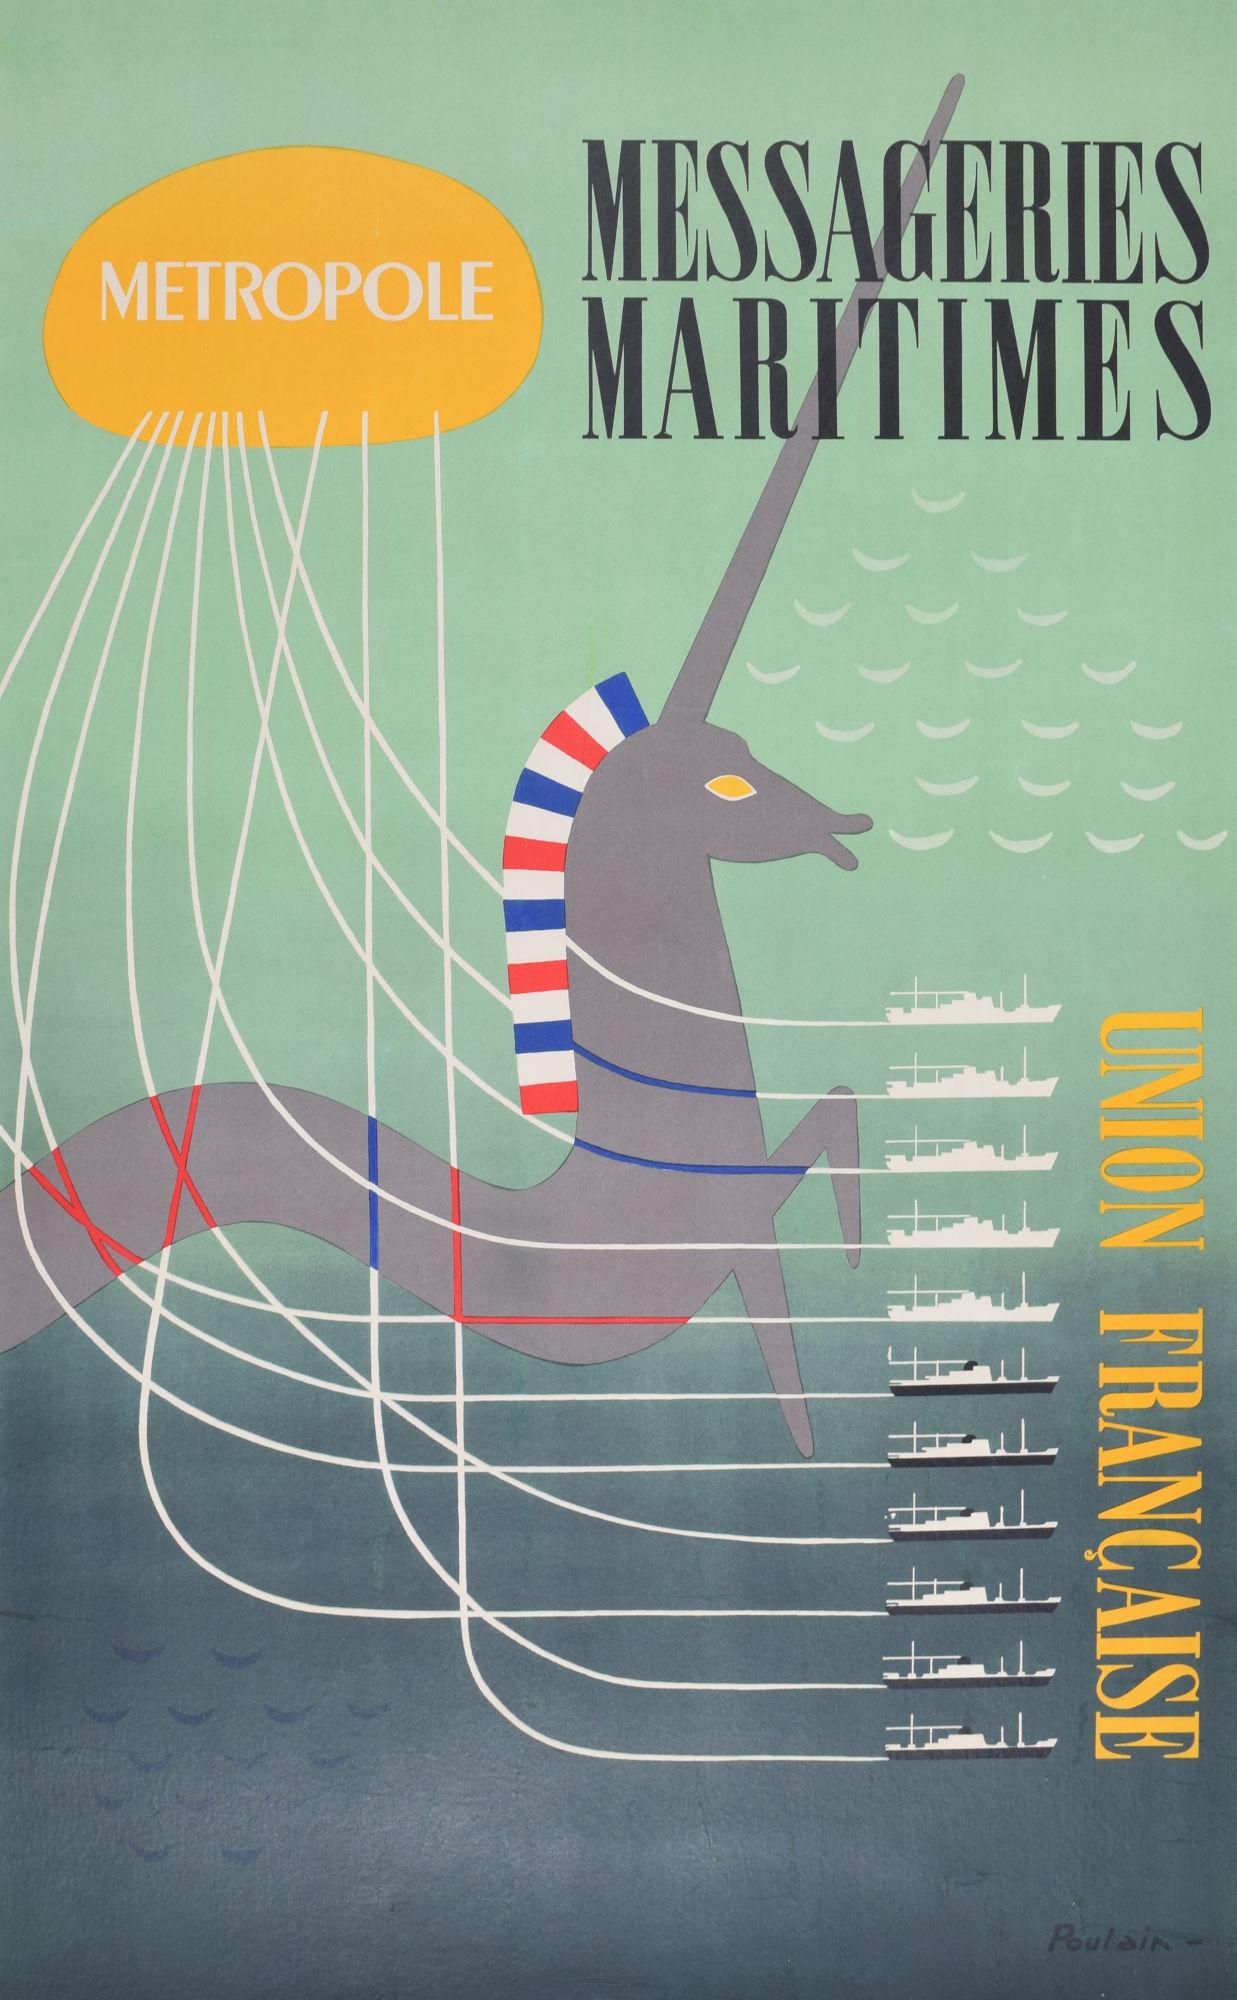 To see our other original vintage posters, scroll down to "More from this Seller" and below it click on "See all from this Seller" - or send us a message if you cannot find the poster you want.

Poulain
Messageries Maritimes - Union